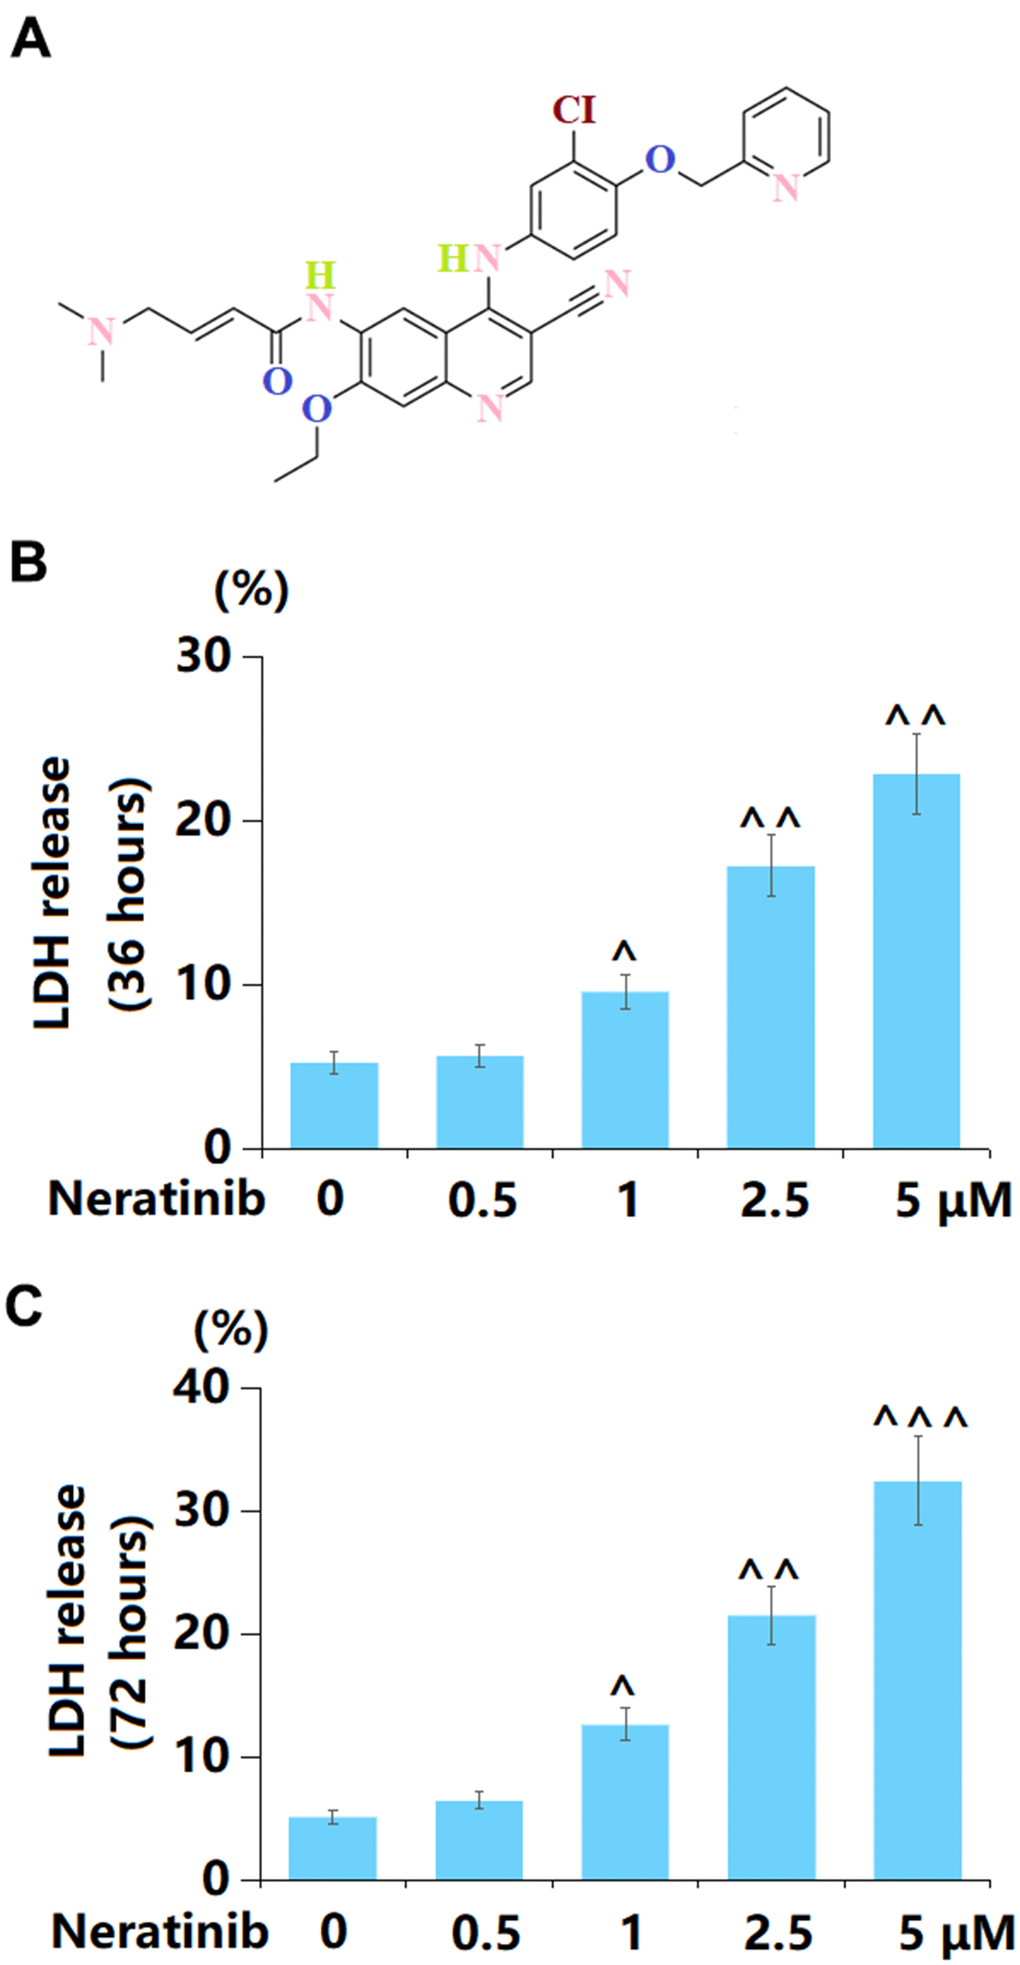 Neratinib induced cytotoxicity in mammary cancer AU565 cells. (A) Molecular structure of Neratinib; (B) Cells were stimulated with 0.5, 1, 2.5, 5 μM Neratinib for 36 hours. LDH release was measured using a commercial kit; (C) Cells were stimulated with 0.5, 1, 2.5, and 5 μM Neratinib for 72 hours. LDH release was measured using a commercial kit (^, ^^, ^^^, P